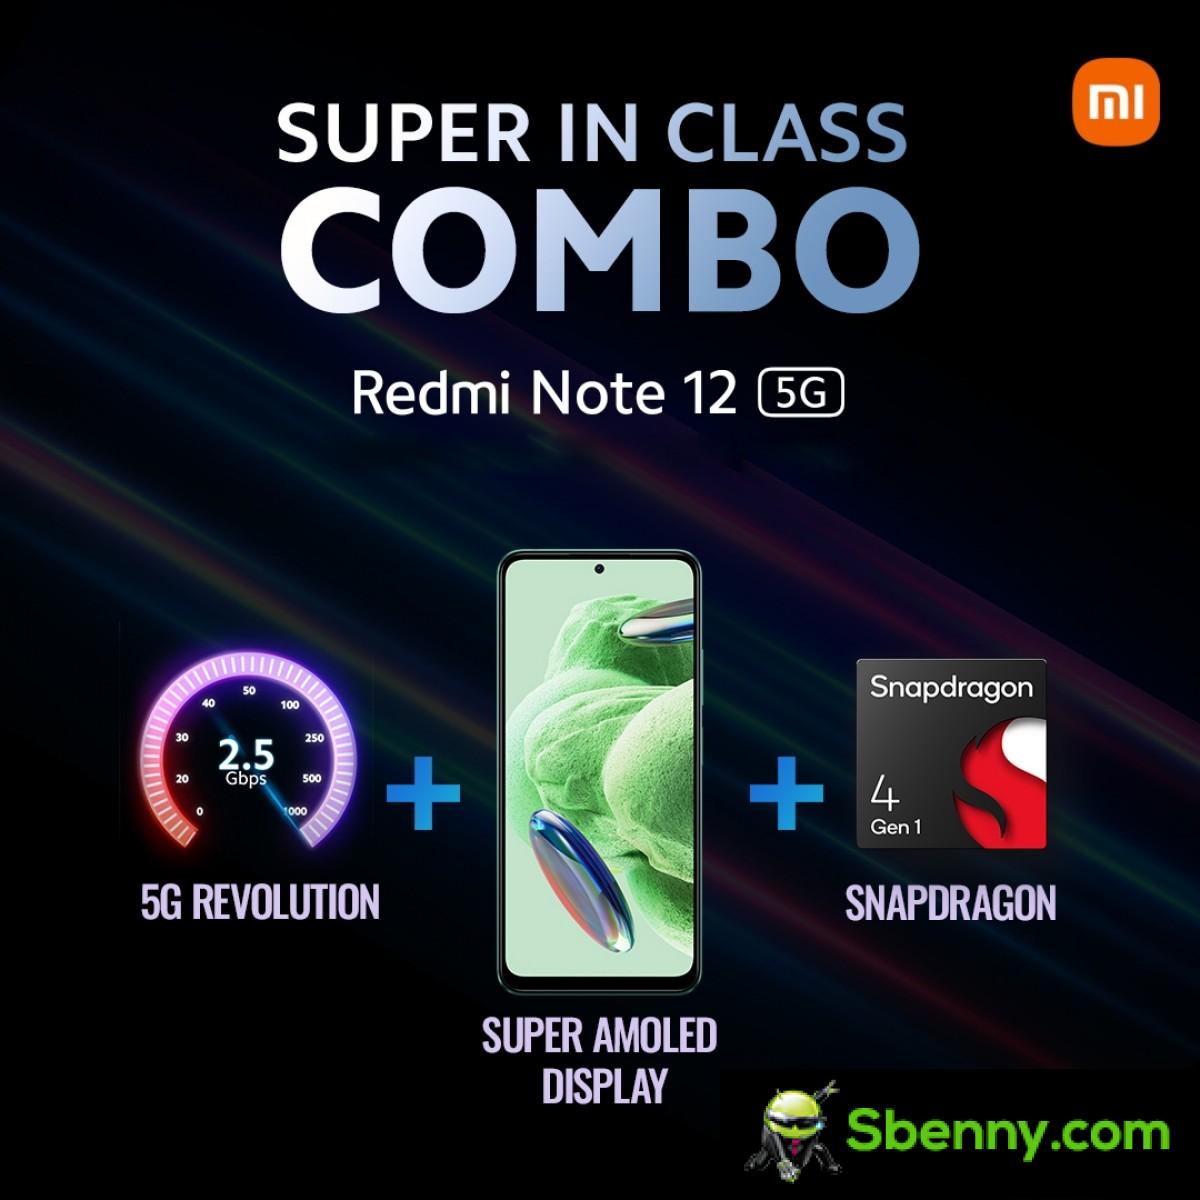 Xiaomi introduces the Redmi Note 12 series to the global stage